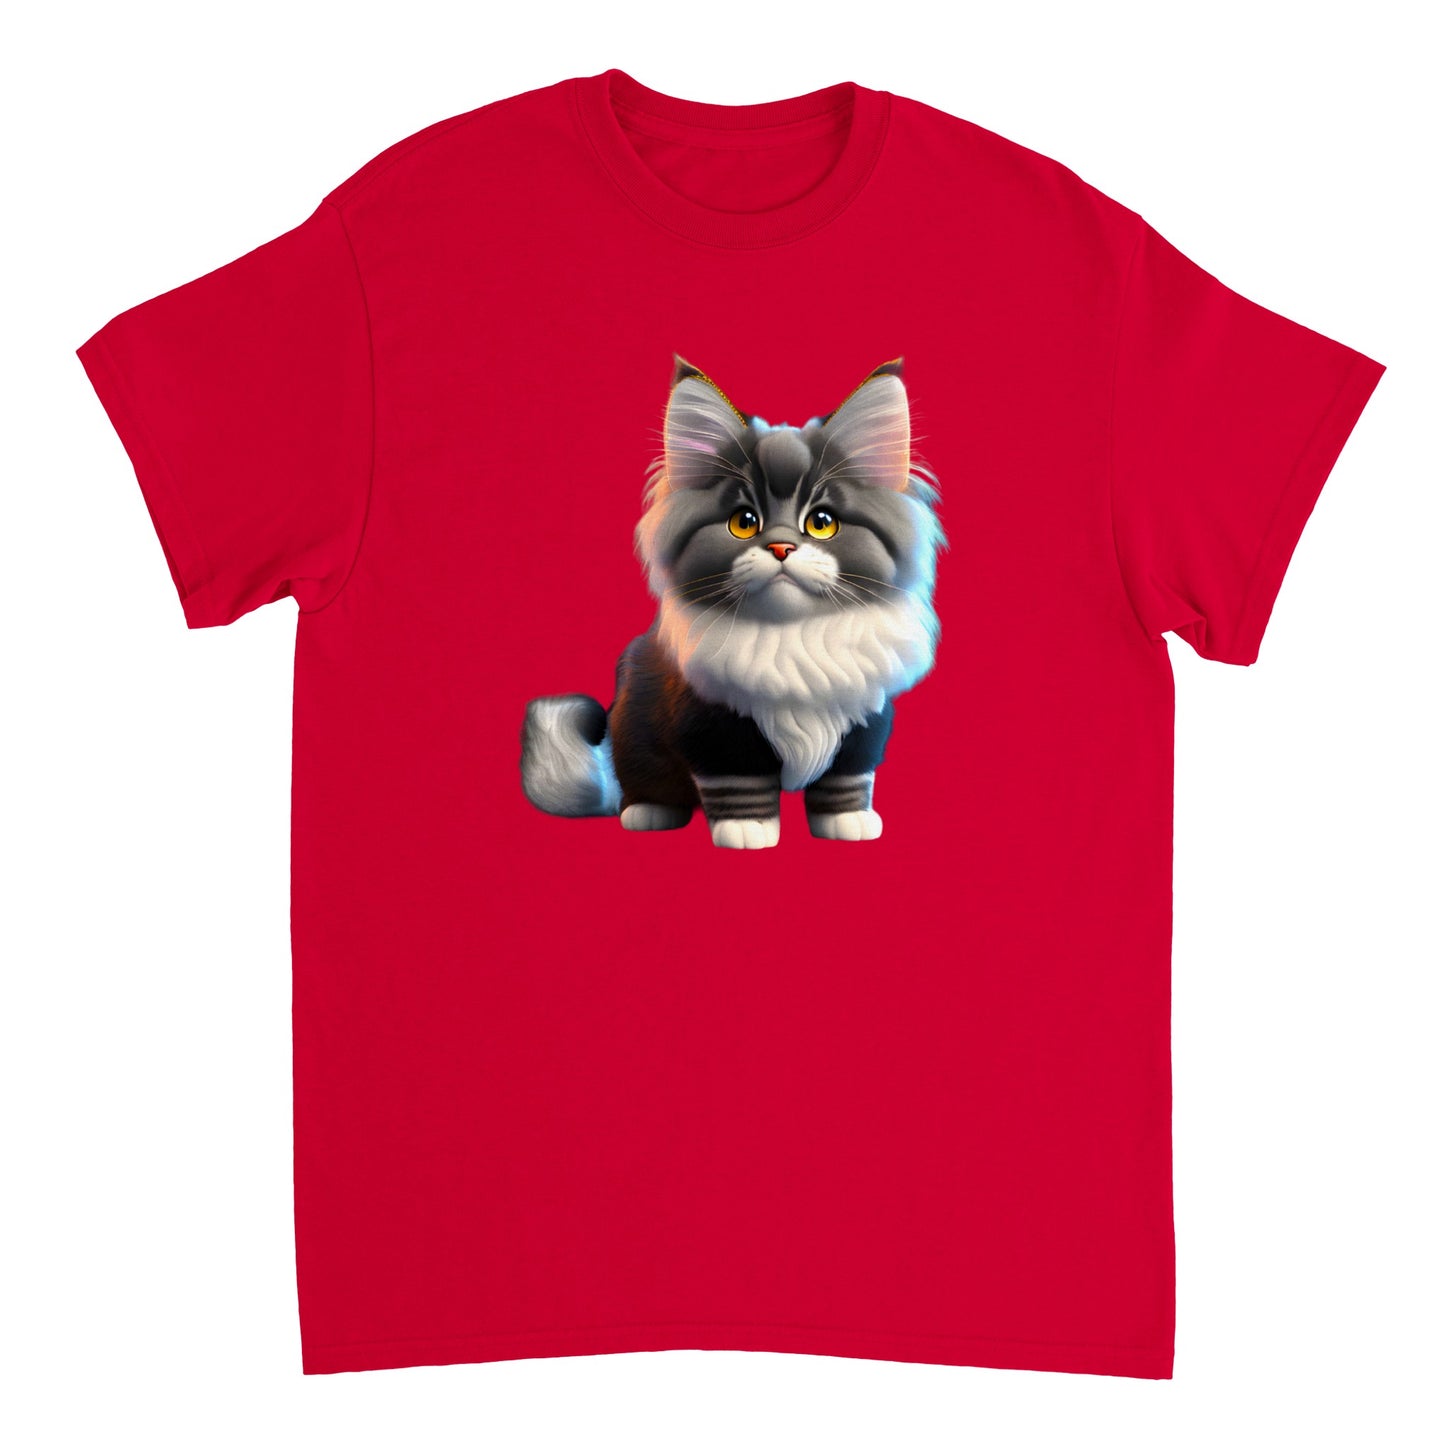 Adorable, Cool, Cute Cats and Kittens Toy - Heavyweight Unisex Crewneck T-shirt 2